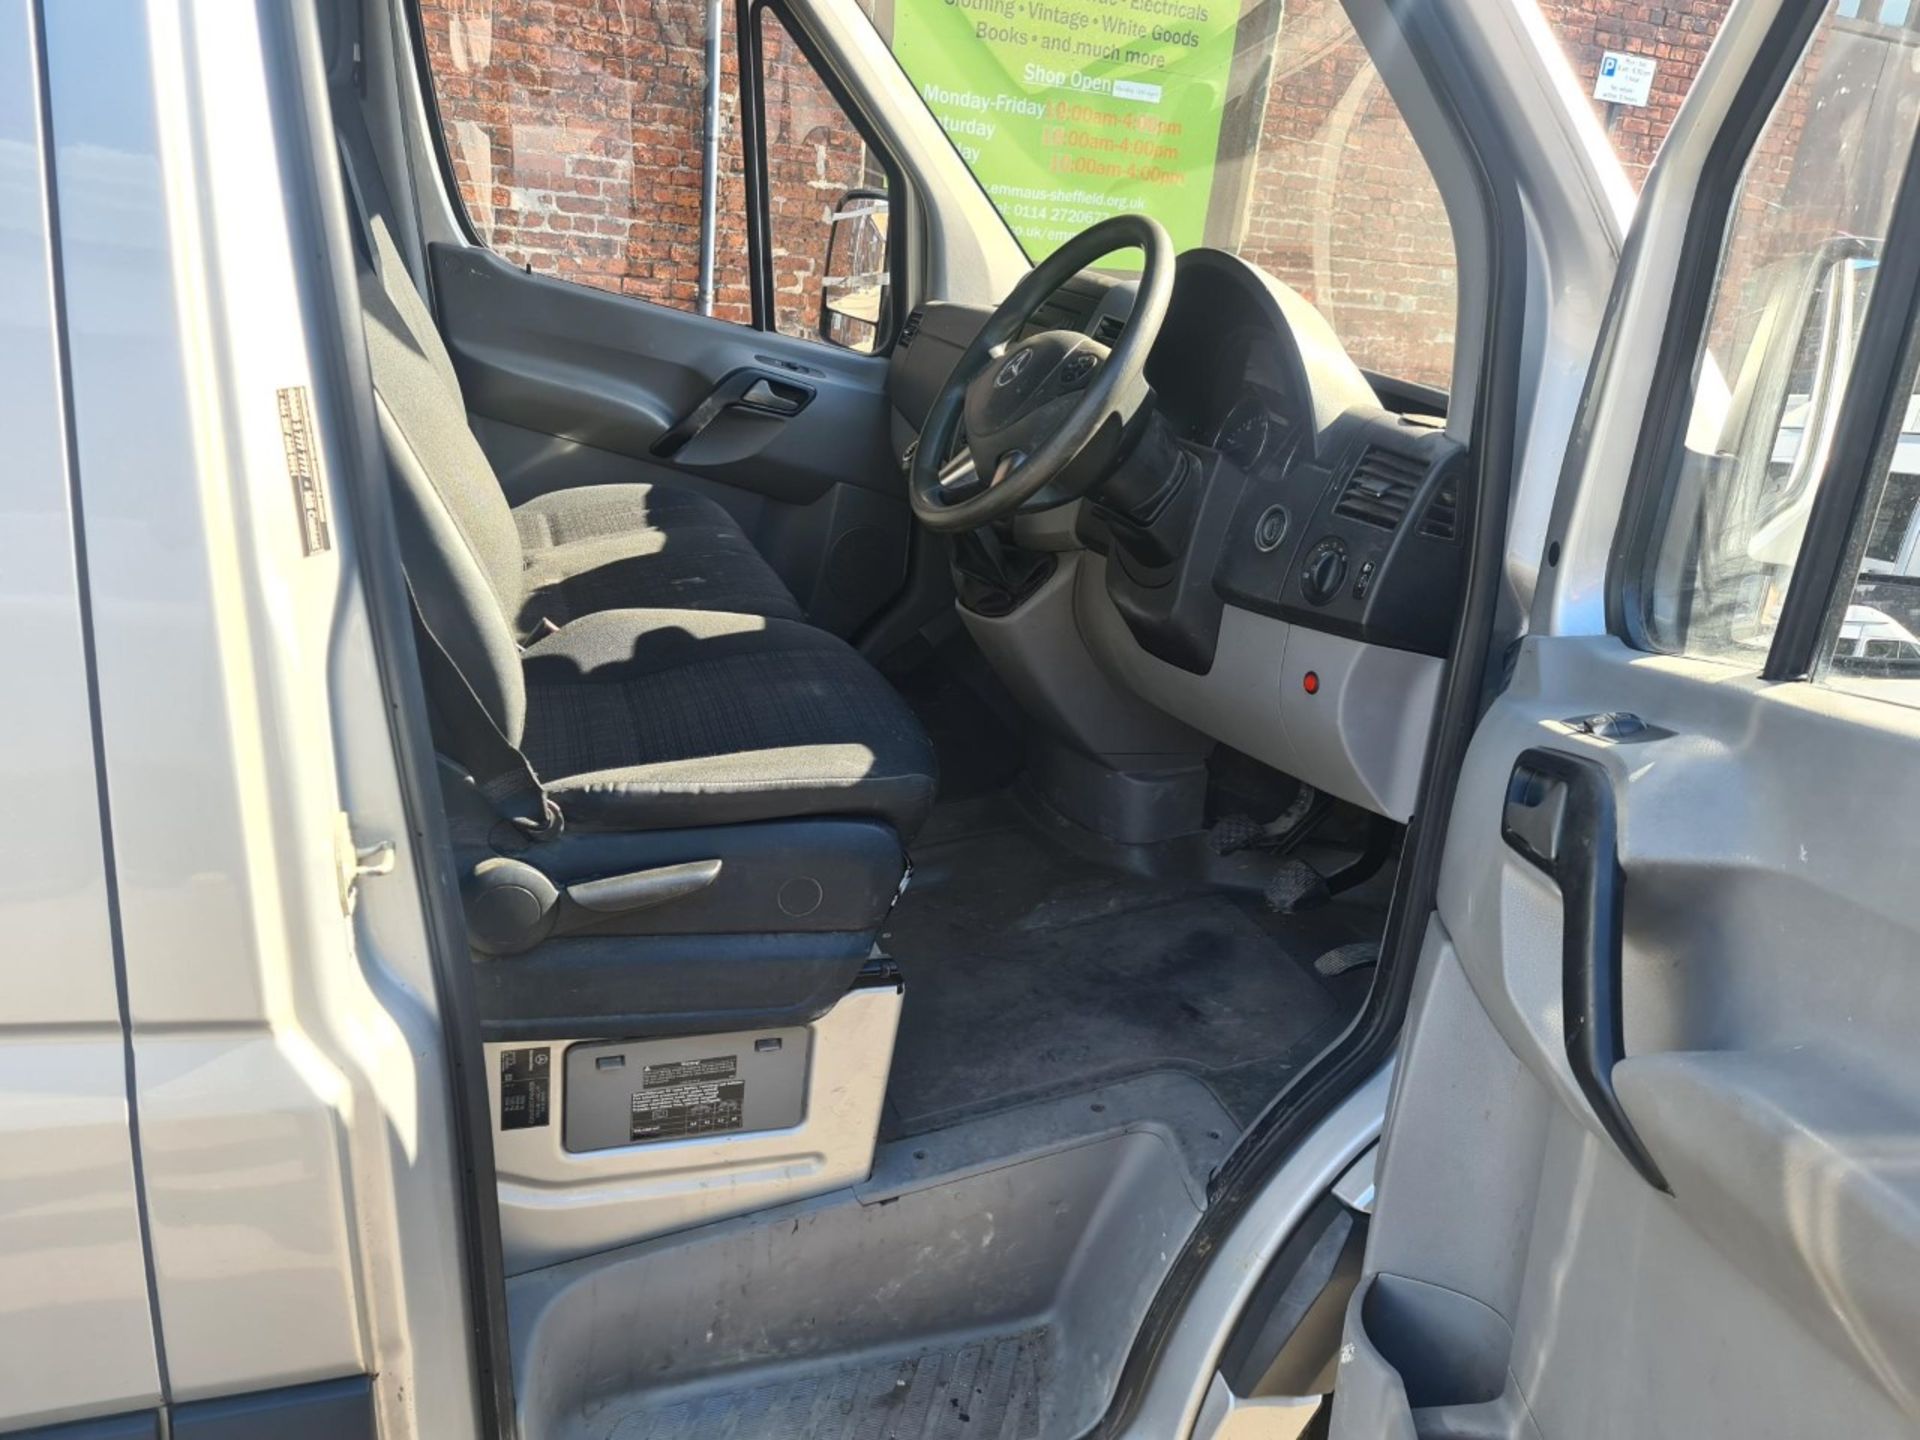 LM14NGX - 2014 MERCEDES BENZ SPRINTER 313CDI. SILVER. 109,583 MILES. MOT valid until 25 January - Image 3 of 9